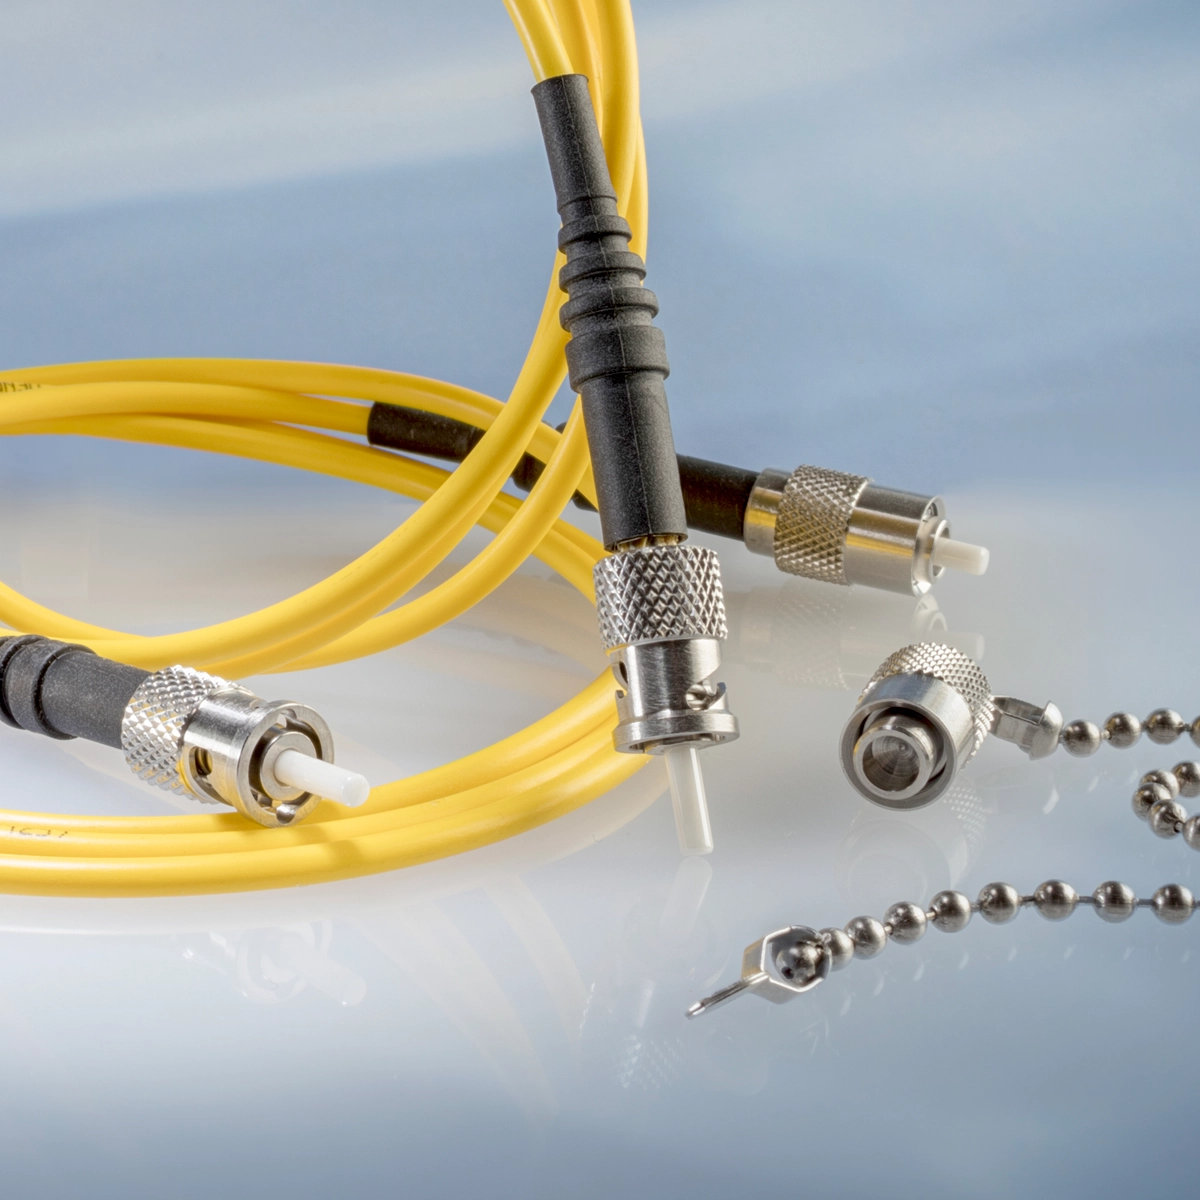 GreeneTweed’s Fiber Optic Extreme interconnects